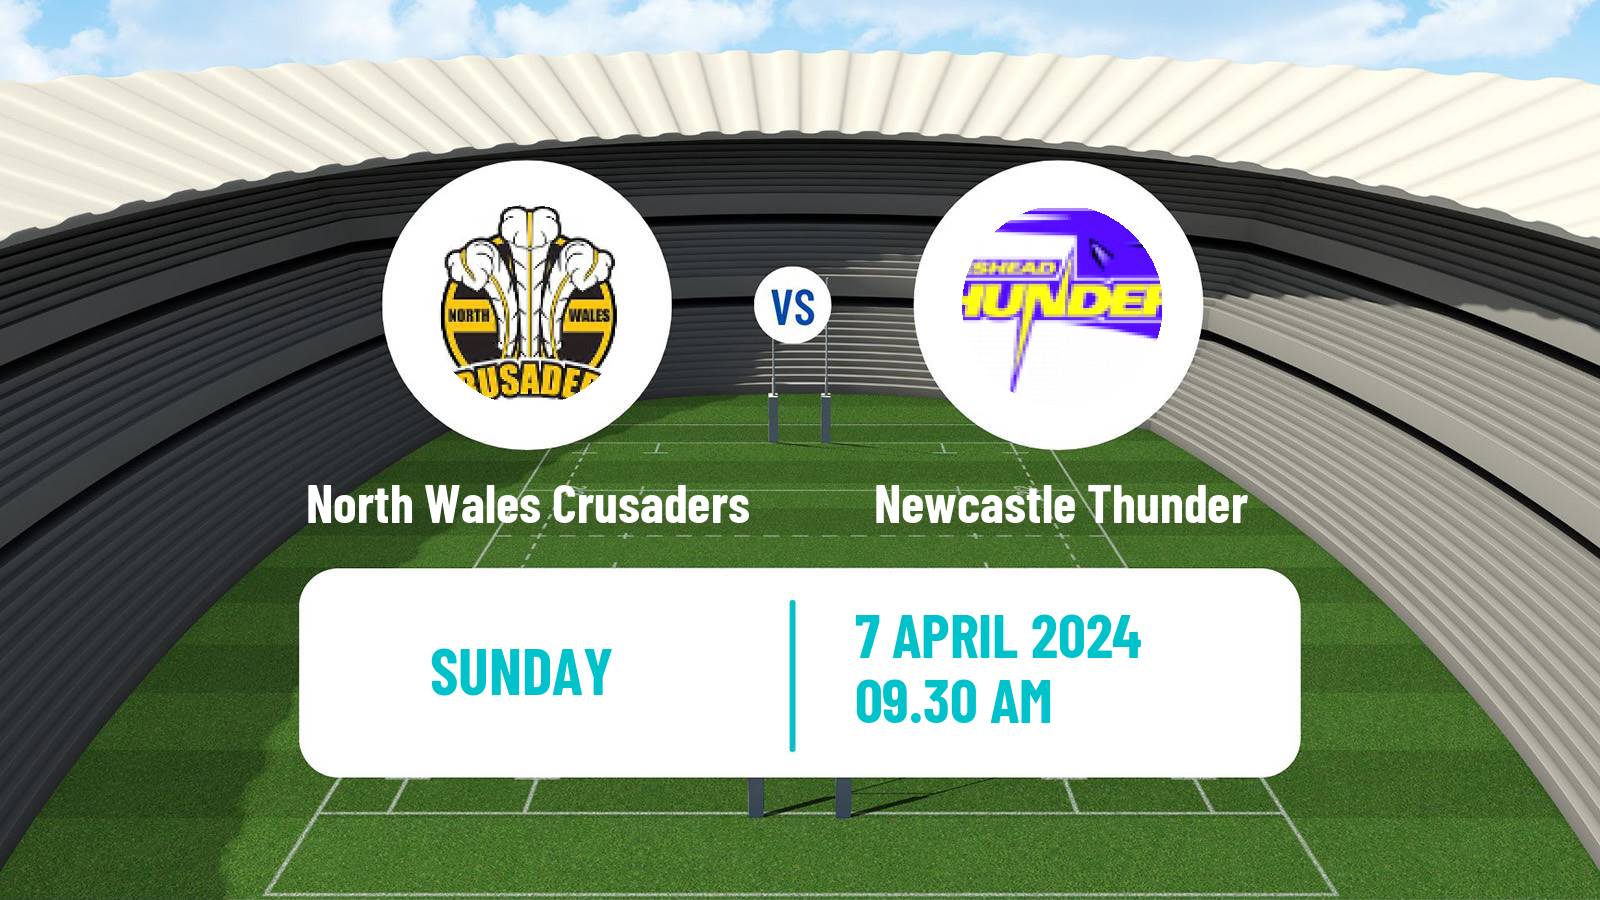 Rugby league English League 1 Rugby League North Wales Crusaders - Newcastle Thunder